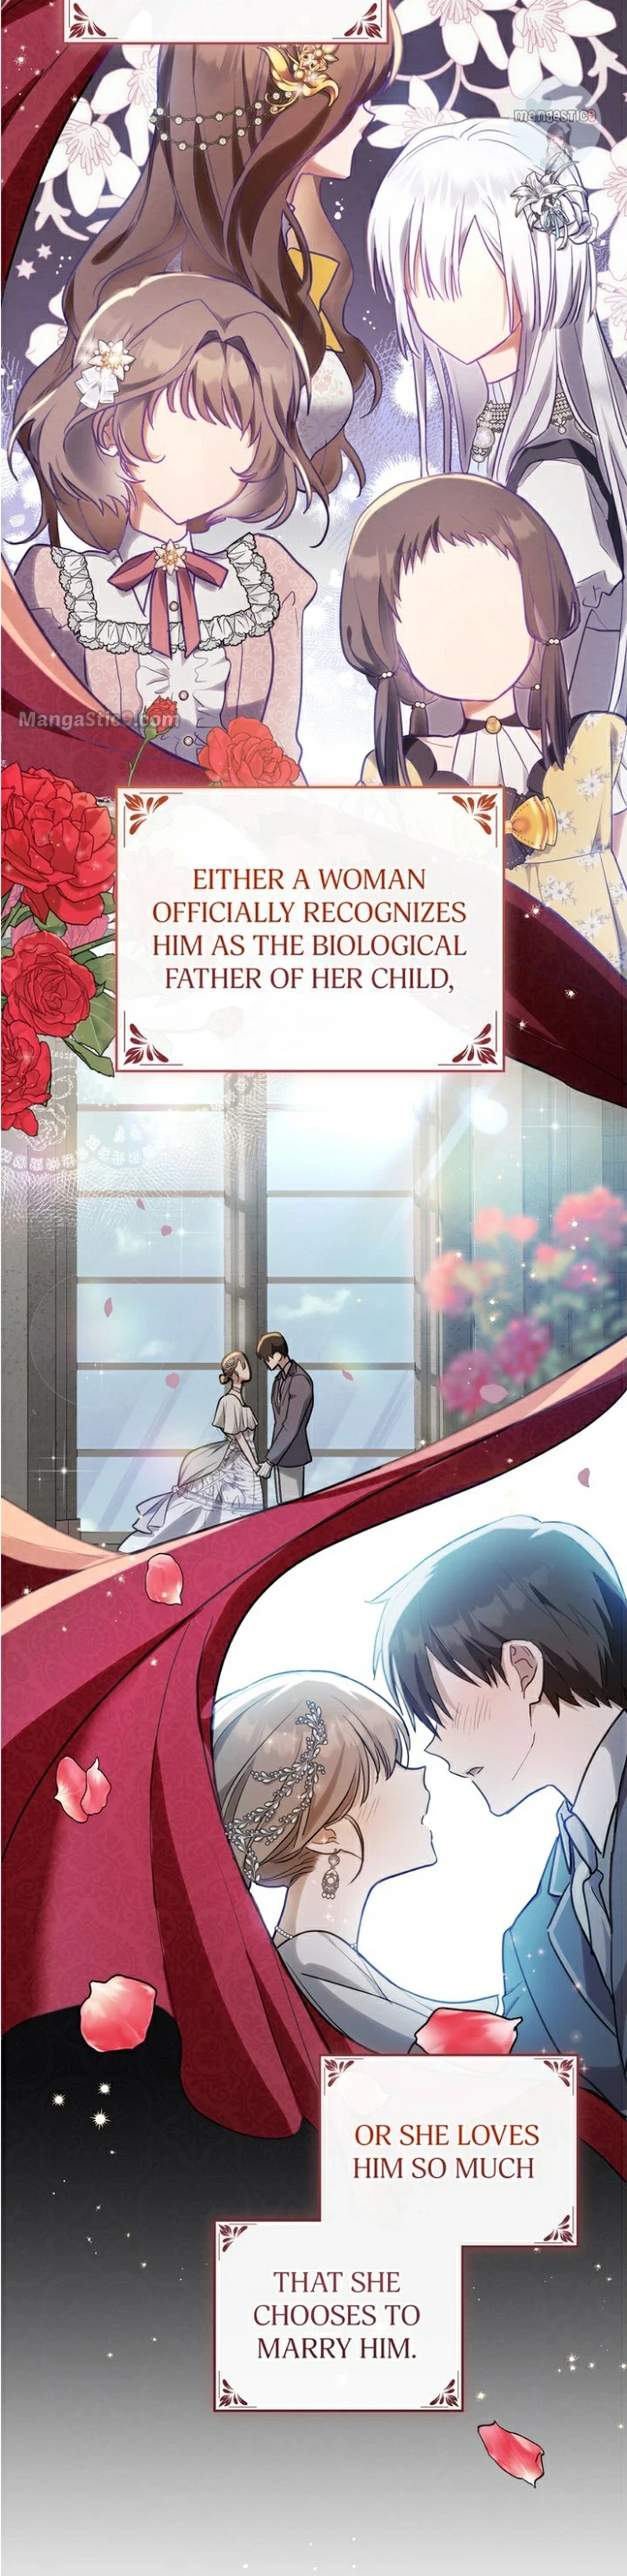 Falling for a Dying Princess chapter 1